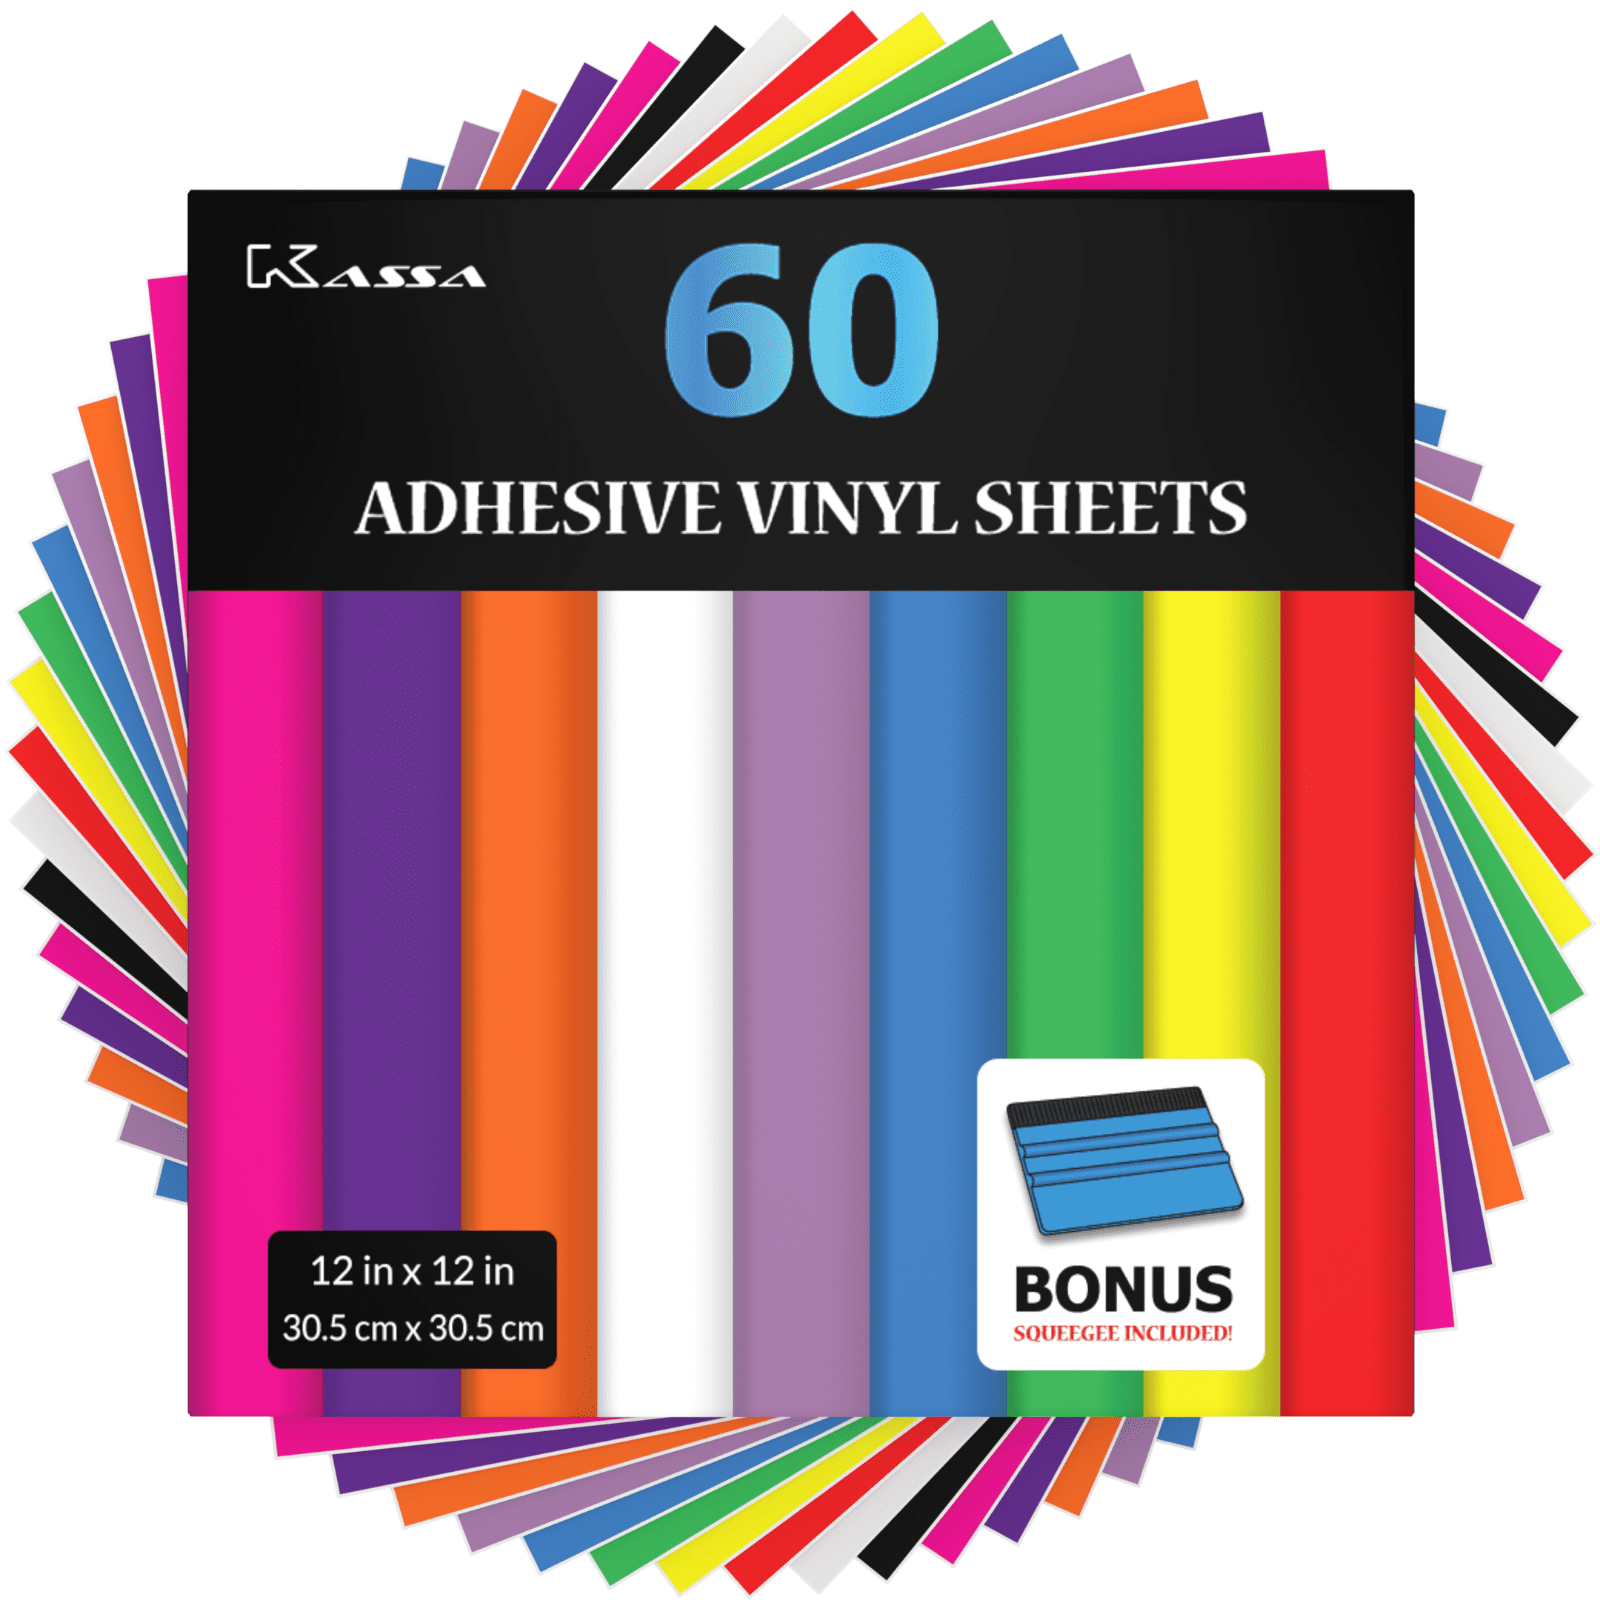 Oracal 651 Starter kit  15 Glossy Self Adhesive Vinyl Sheets  12" x 12" assorted 